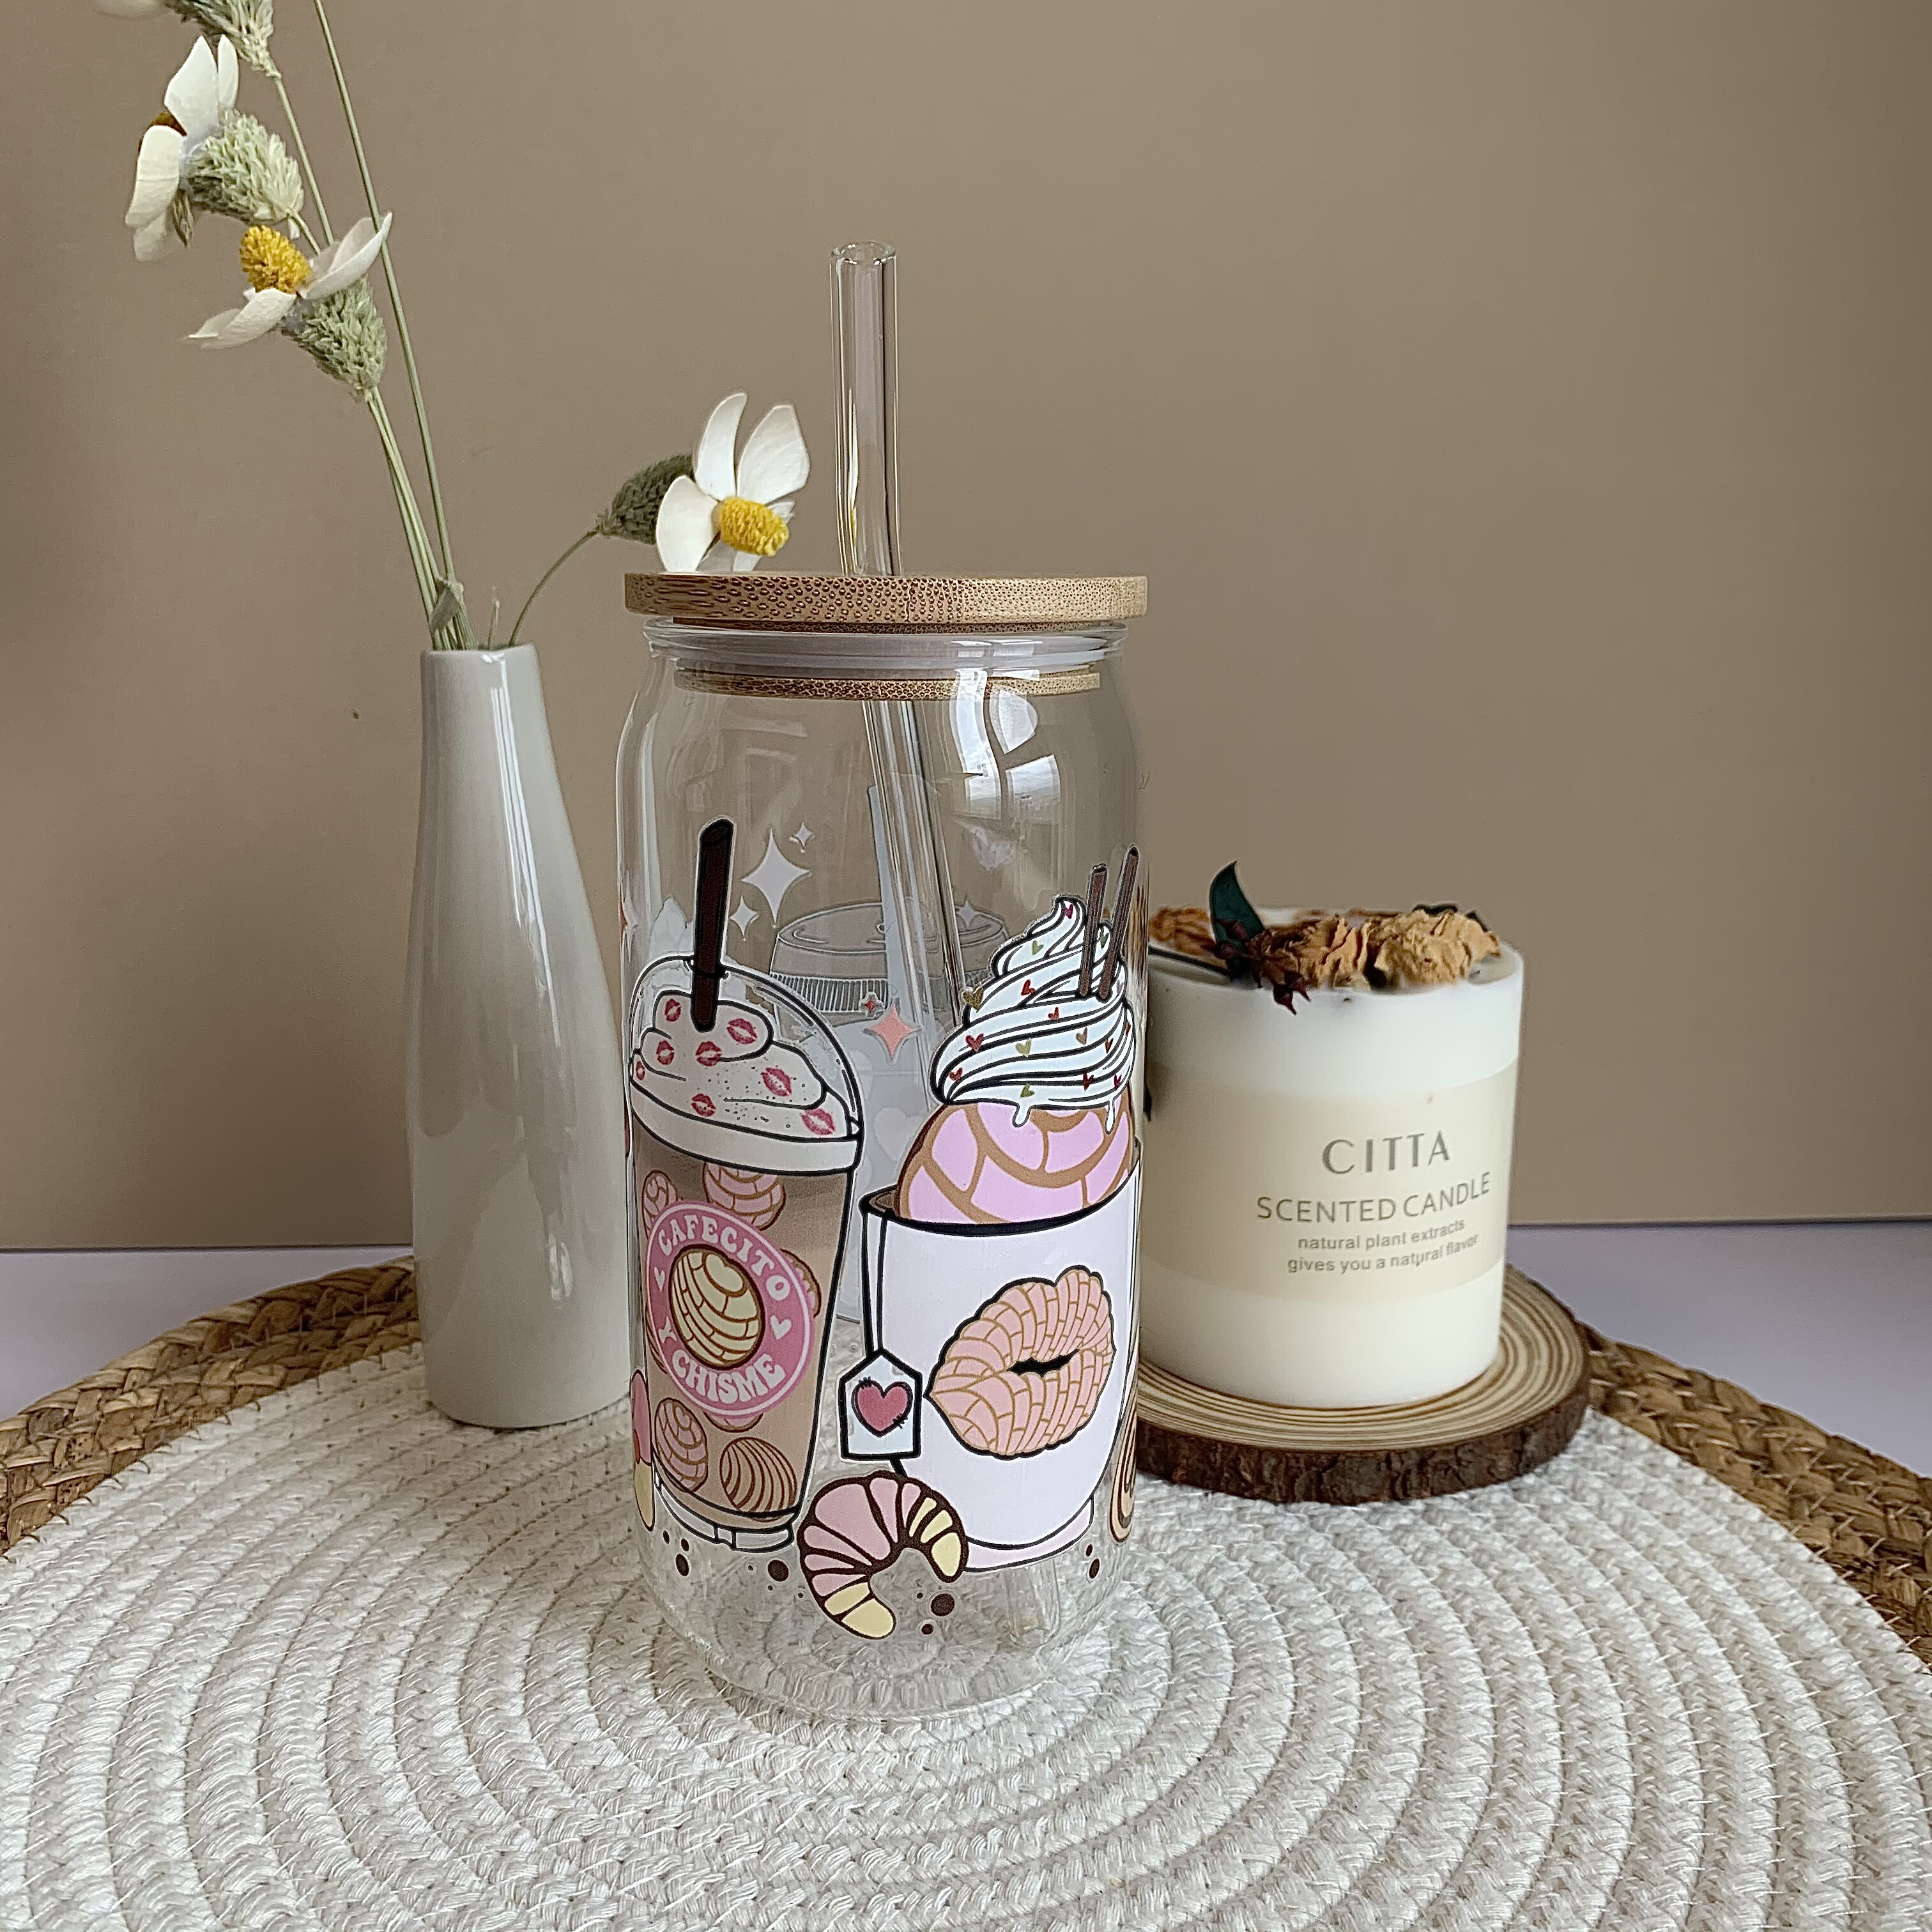 Floral Glass Coffee Cup, Garden Glass Iced Coffee Cup with Bamboo